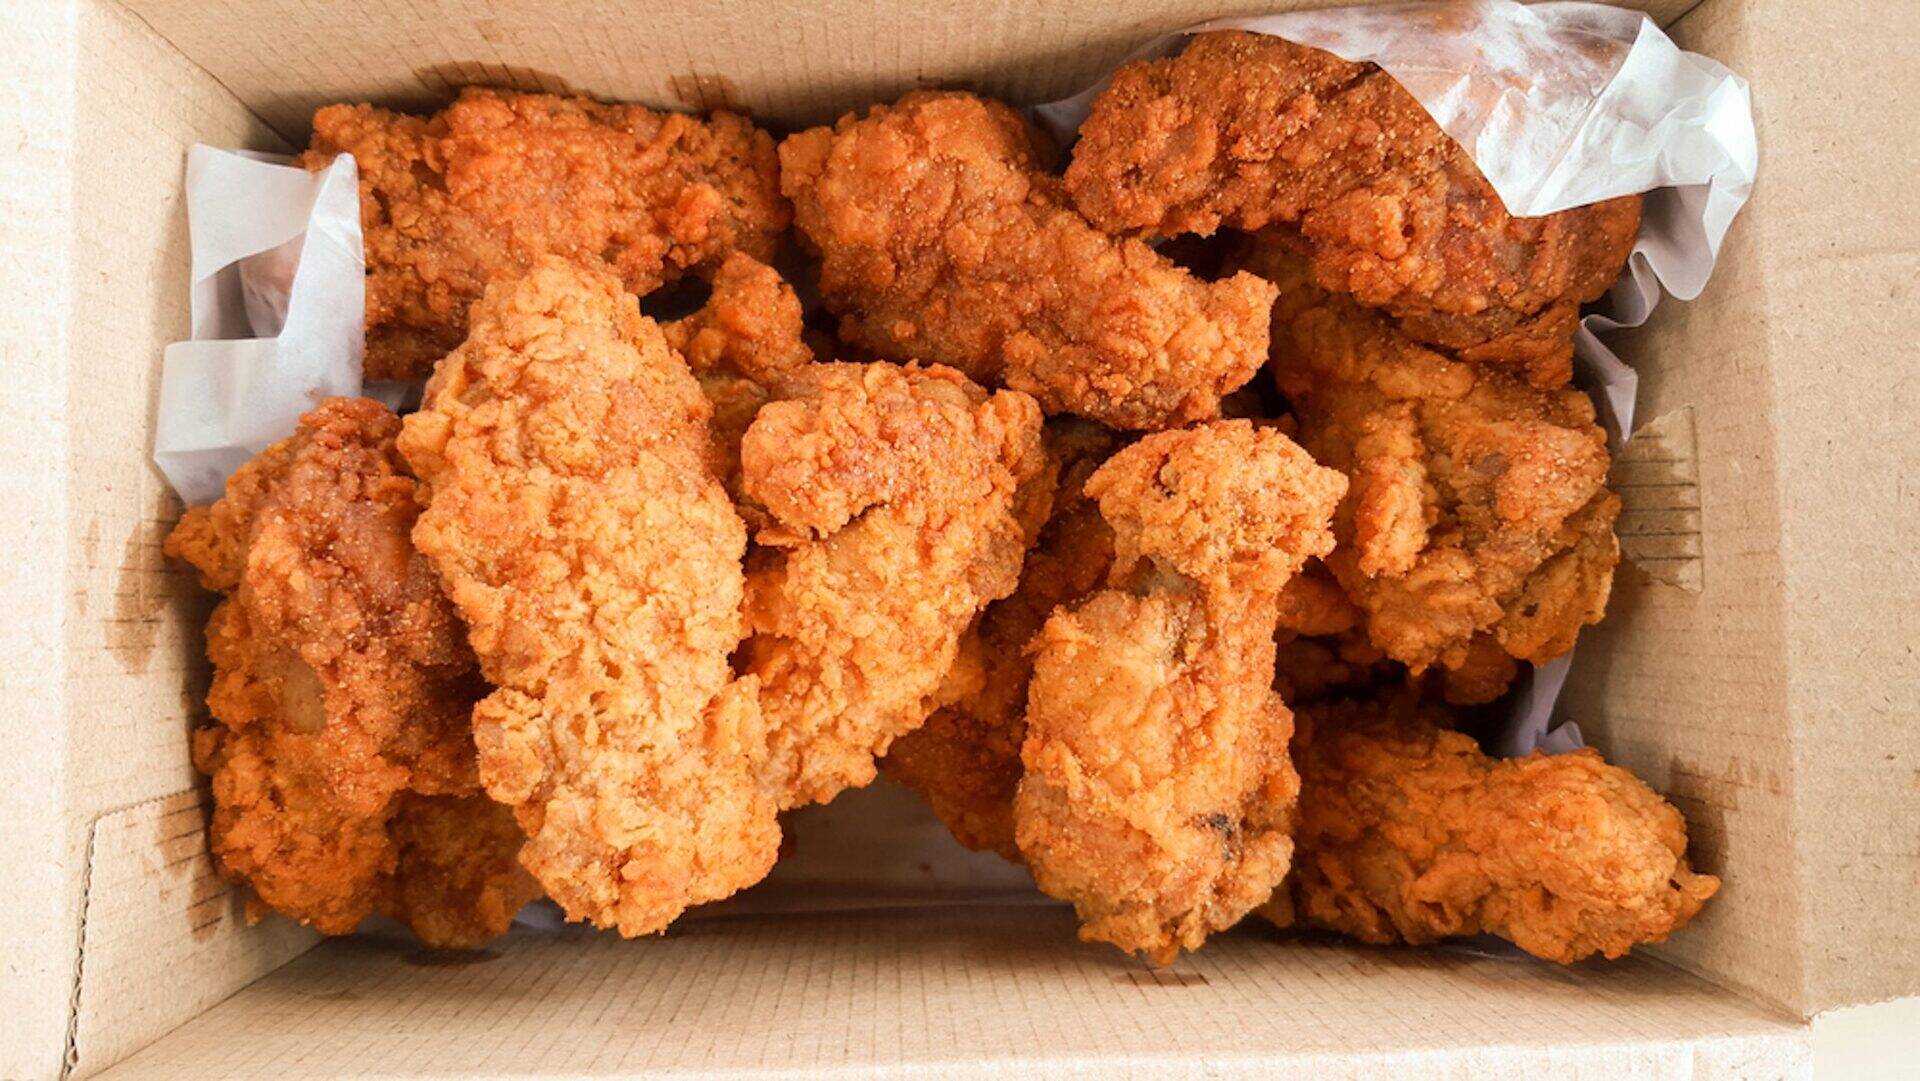 How To Store Fried Chicken To Keep It Crispy